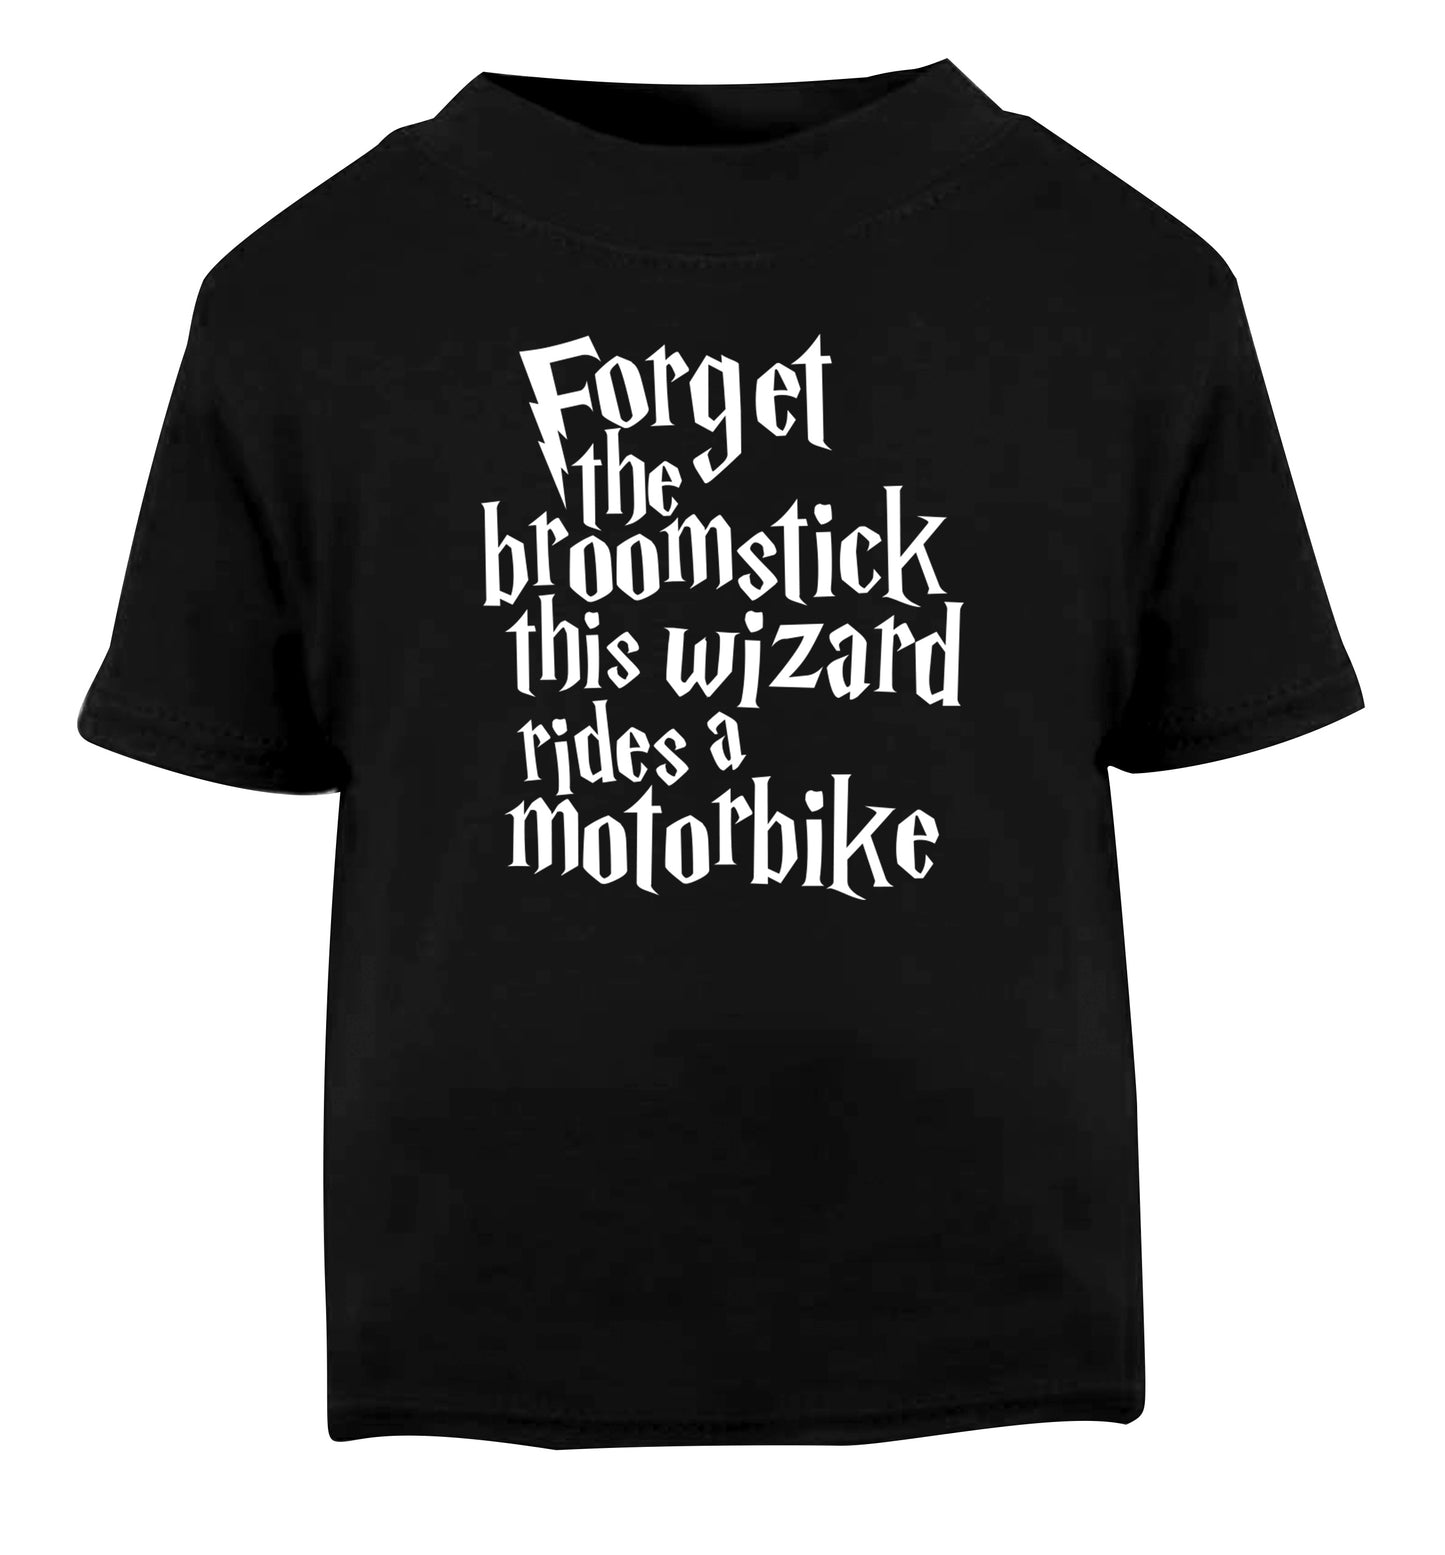 Forget the broomstick this wizard rides a motorbike Black Baby Toddler Tshirt 2 years